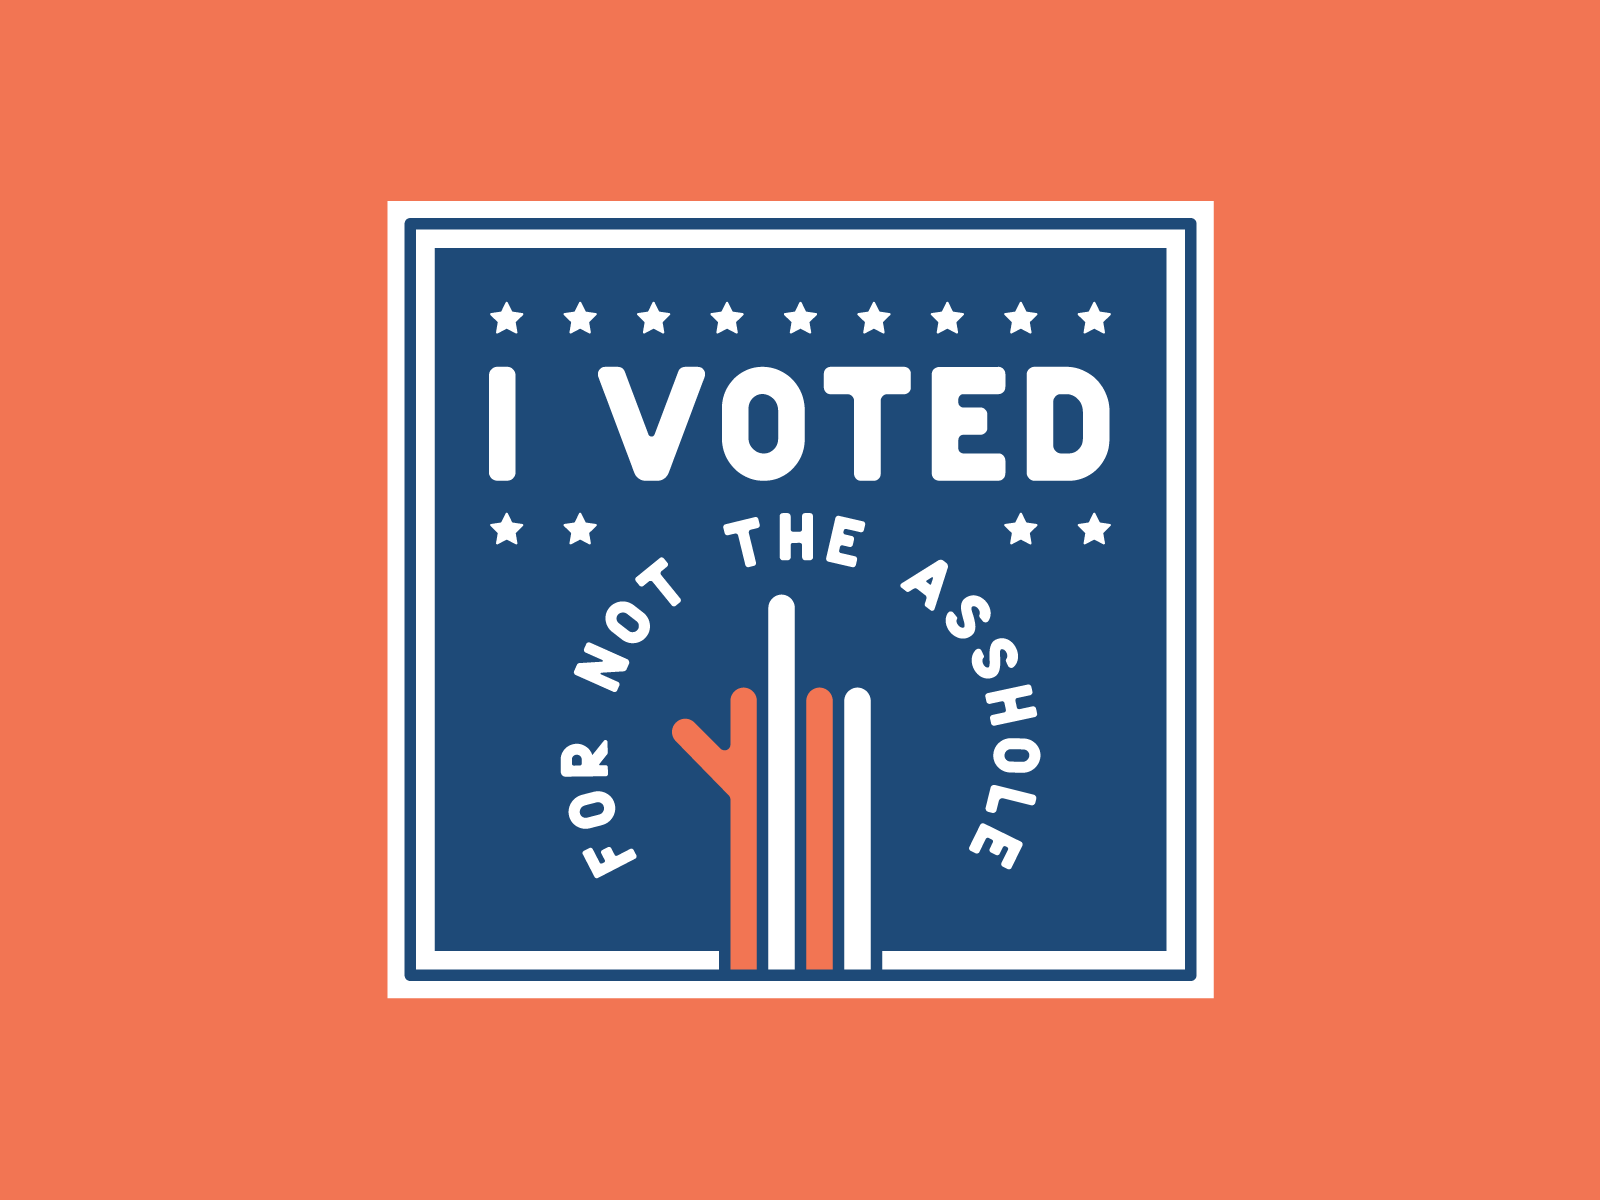 i Voted 2020 election fuck trump graphic design i voted us election